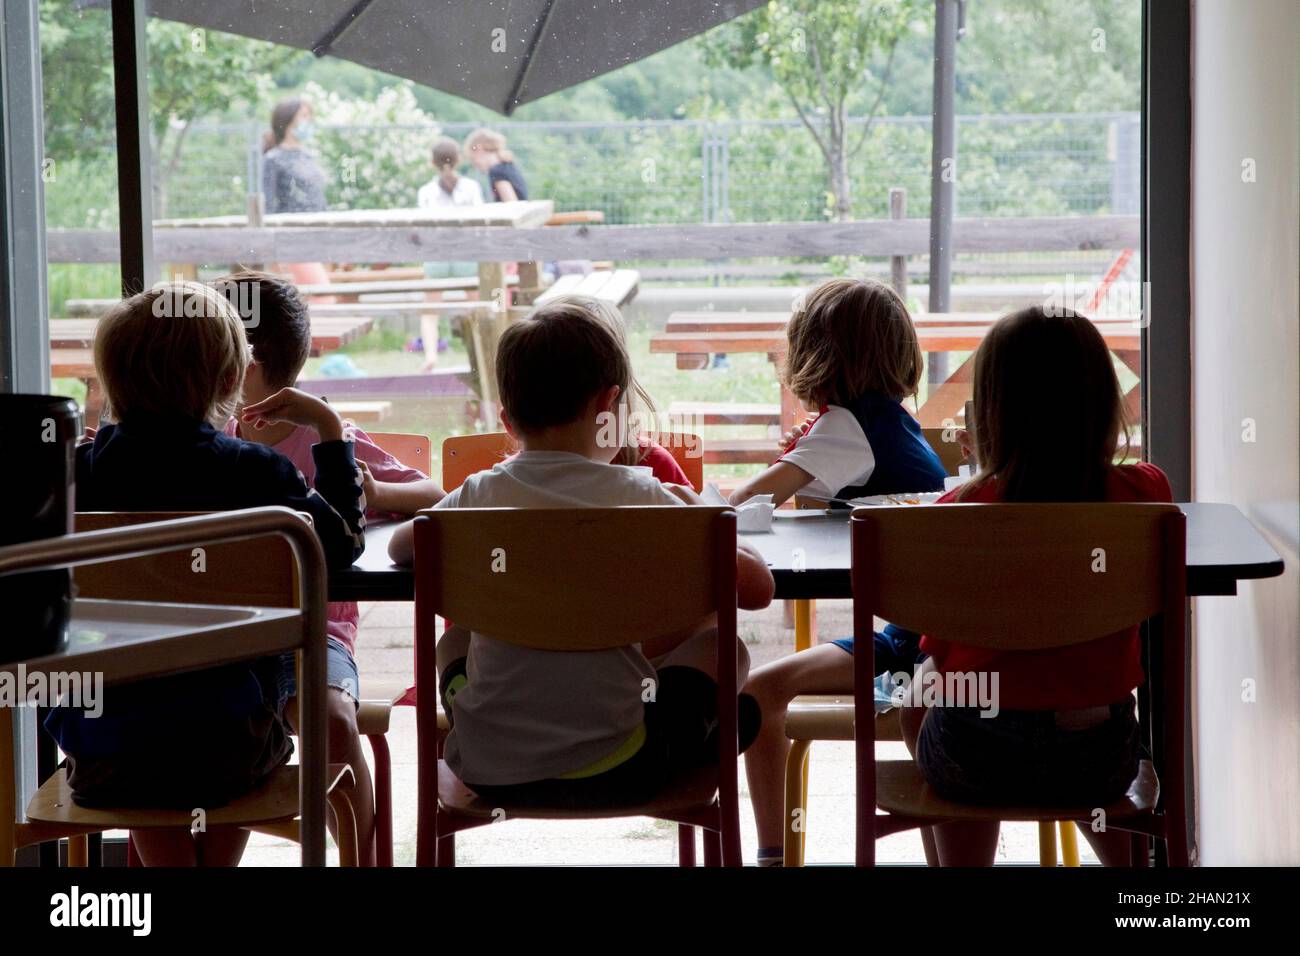 https://c8.alamy.com/comp/2HAN21X/saint-martin-de-queyrieres-french-alps-south-eastern-france-canteen-of-the-primary-school-children-having-lunch-2HAN21X.jpg